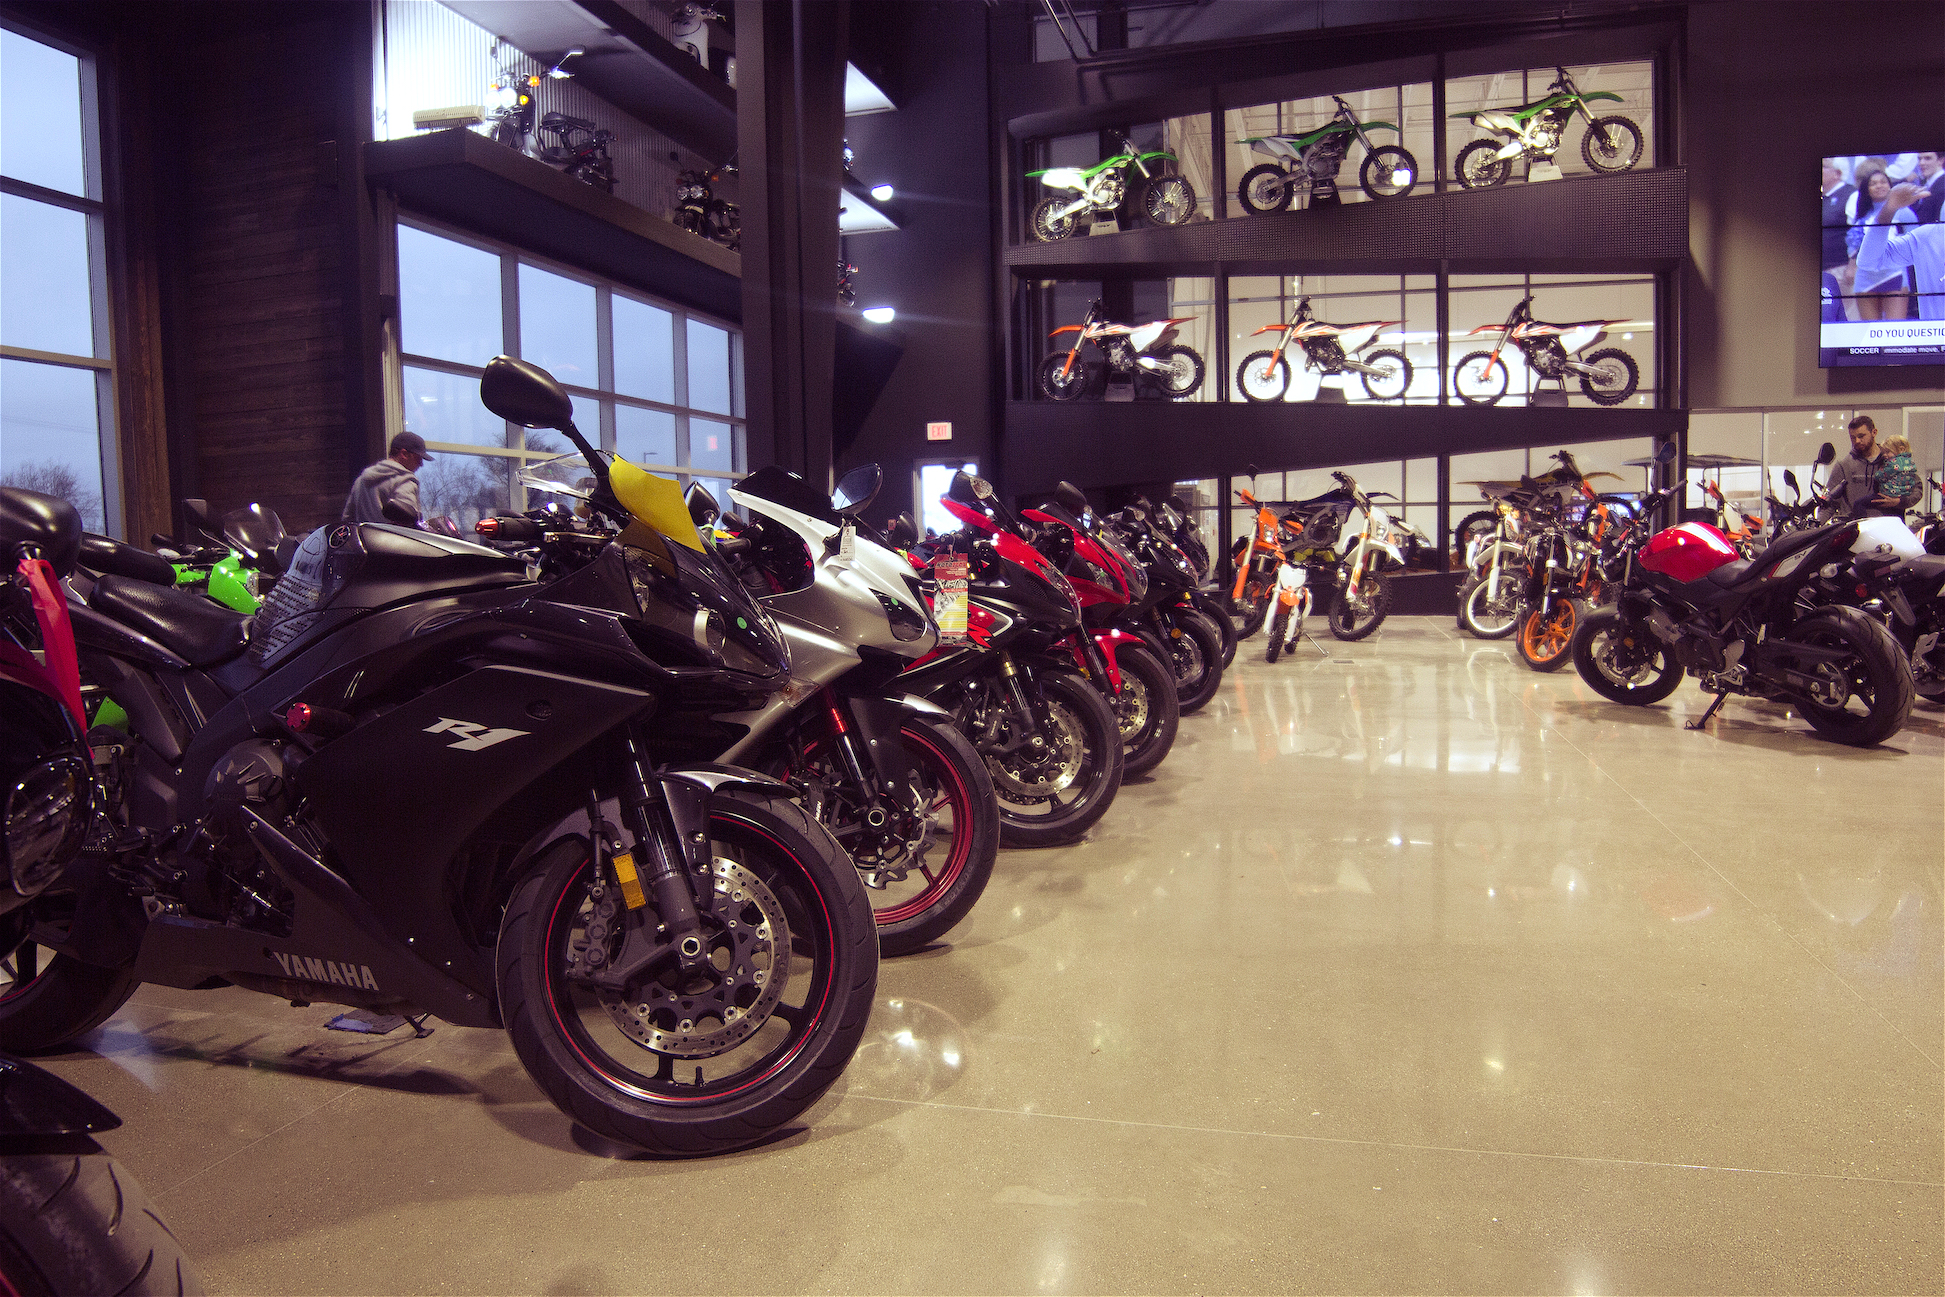 Showroom lined with motorcycles at Zeigler Motorsports